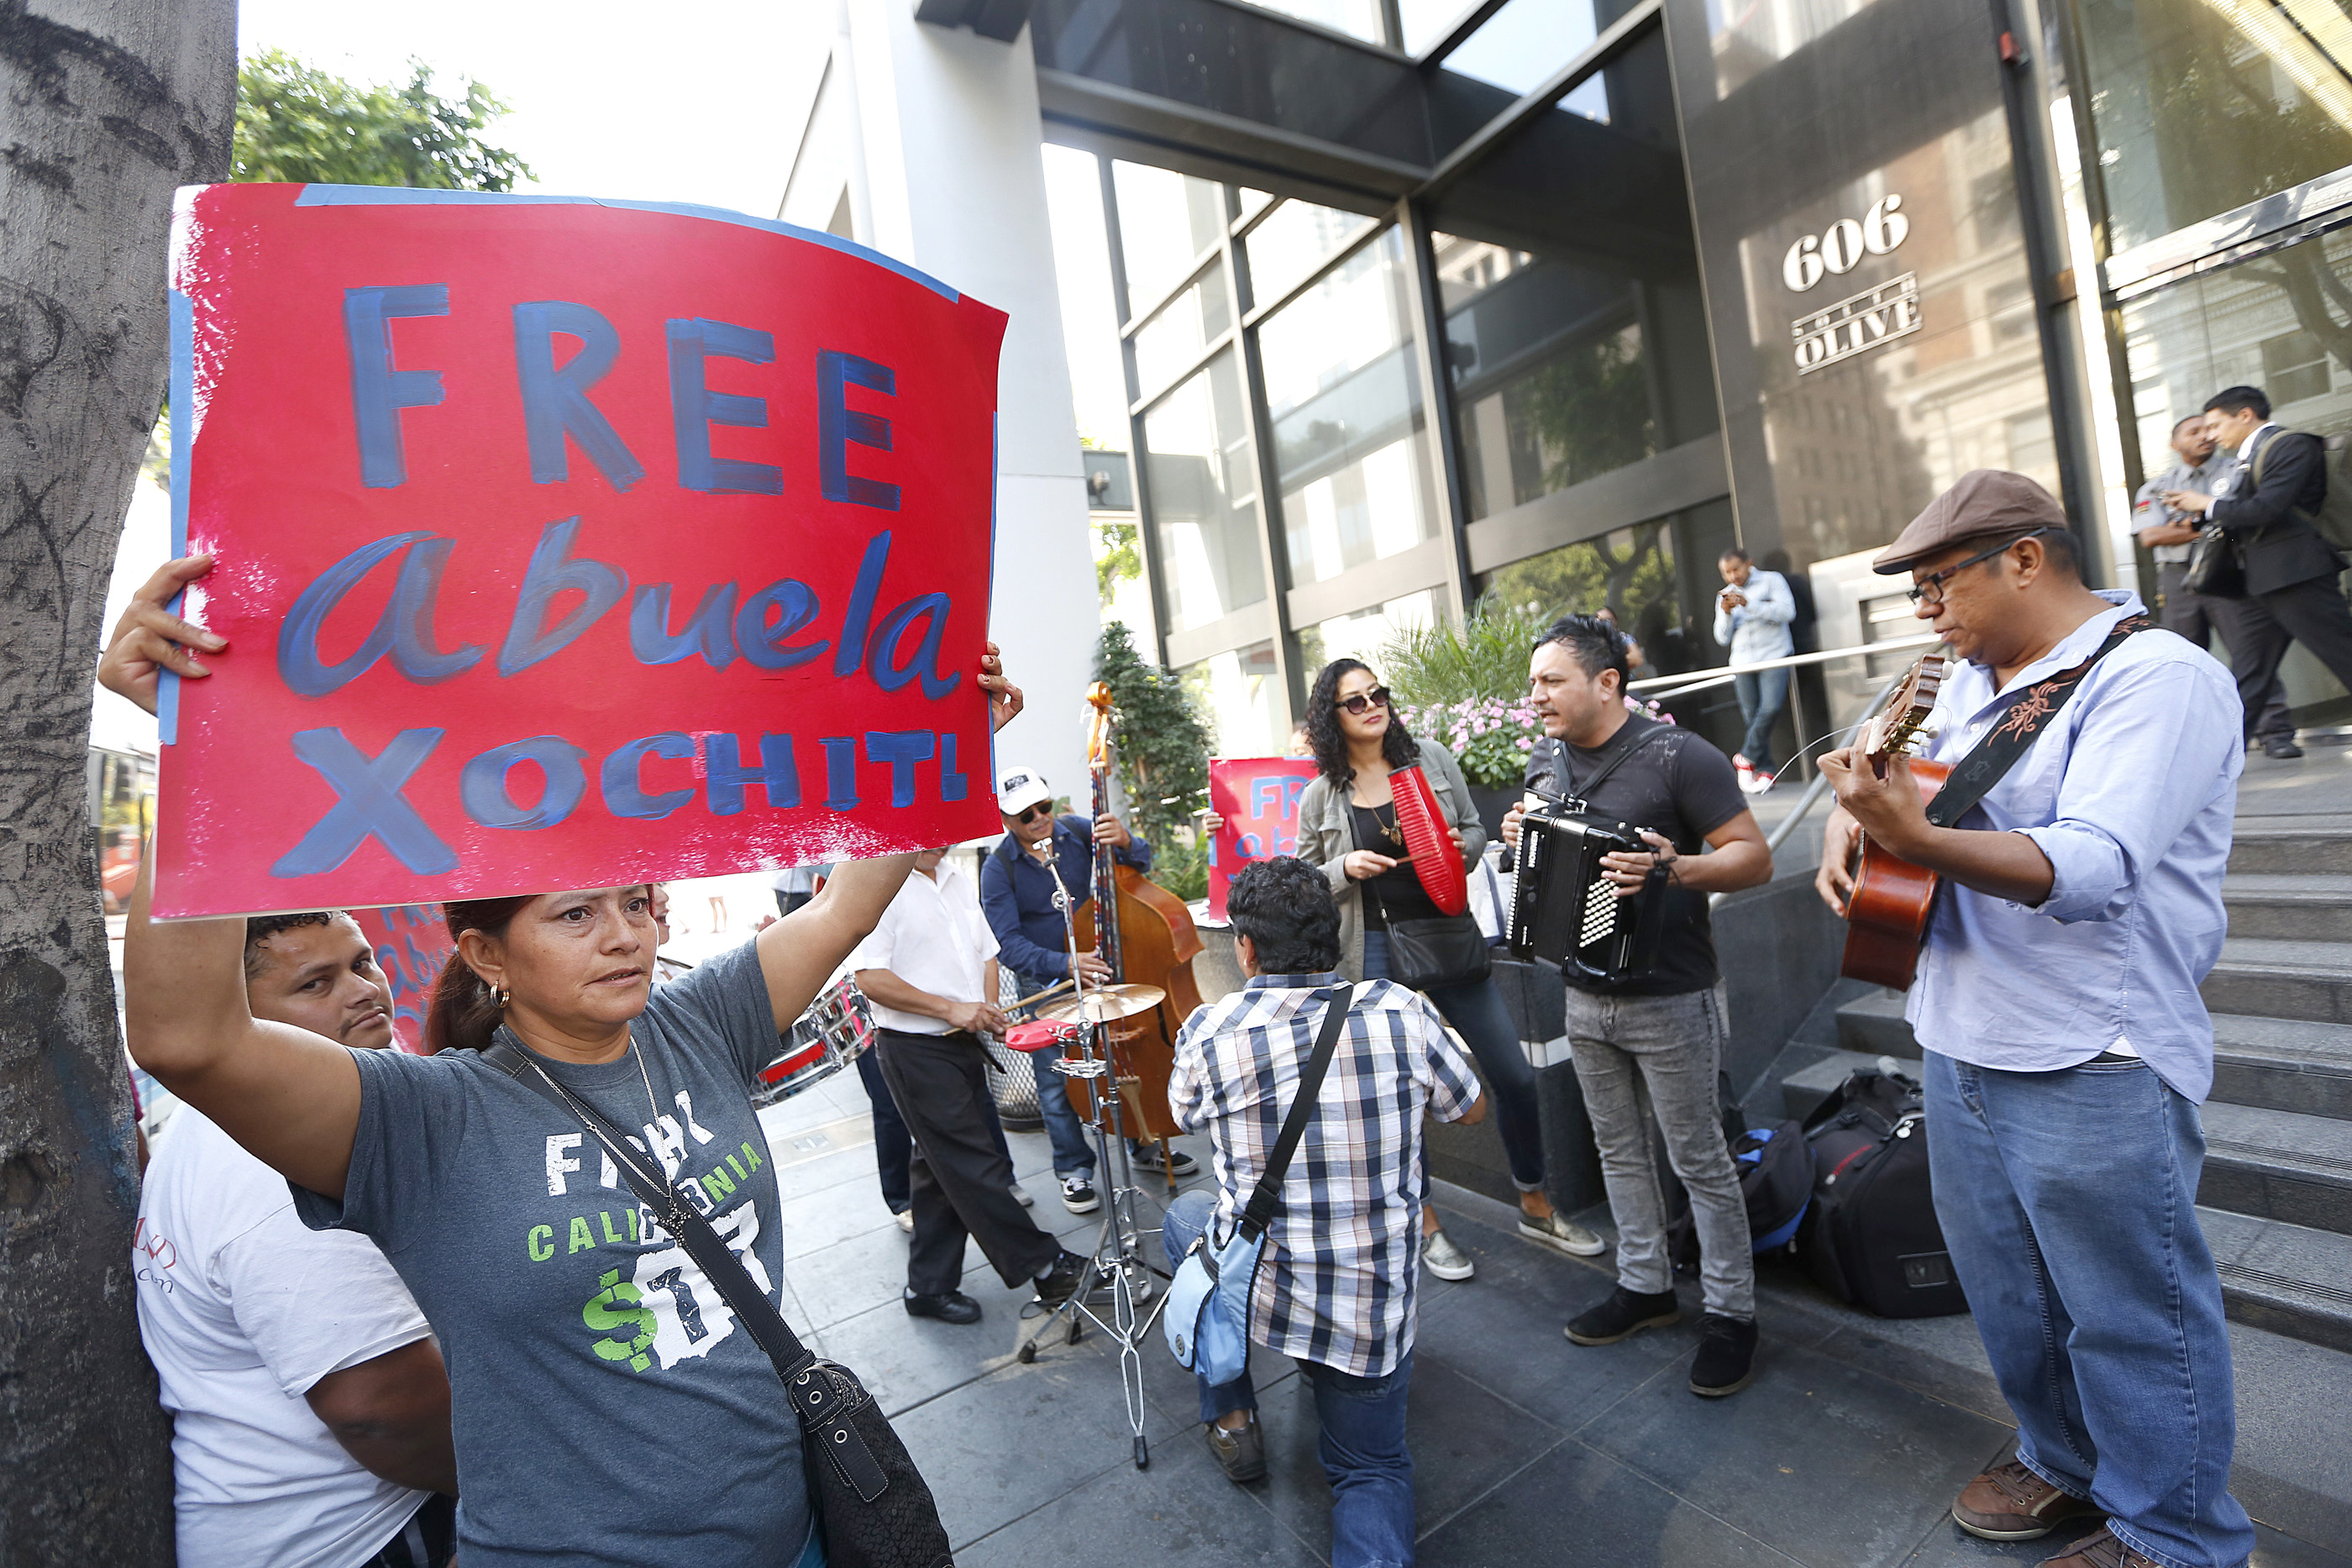 08/23/16/ LOS ANGELES/Immigration advocates and community leaders hold a news conference in front of the Immigration Court Downtown LA., following the bond hearing of Xochitl Hernandez, an immigrant grandmother imprisoned by ICE for six months and in deportation proceedings because of false claims of Ògang involvement.Ó (Photo by Aurelia Ventura/ La Opinion)